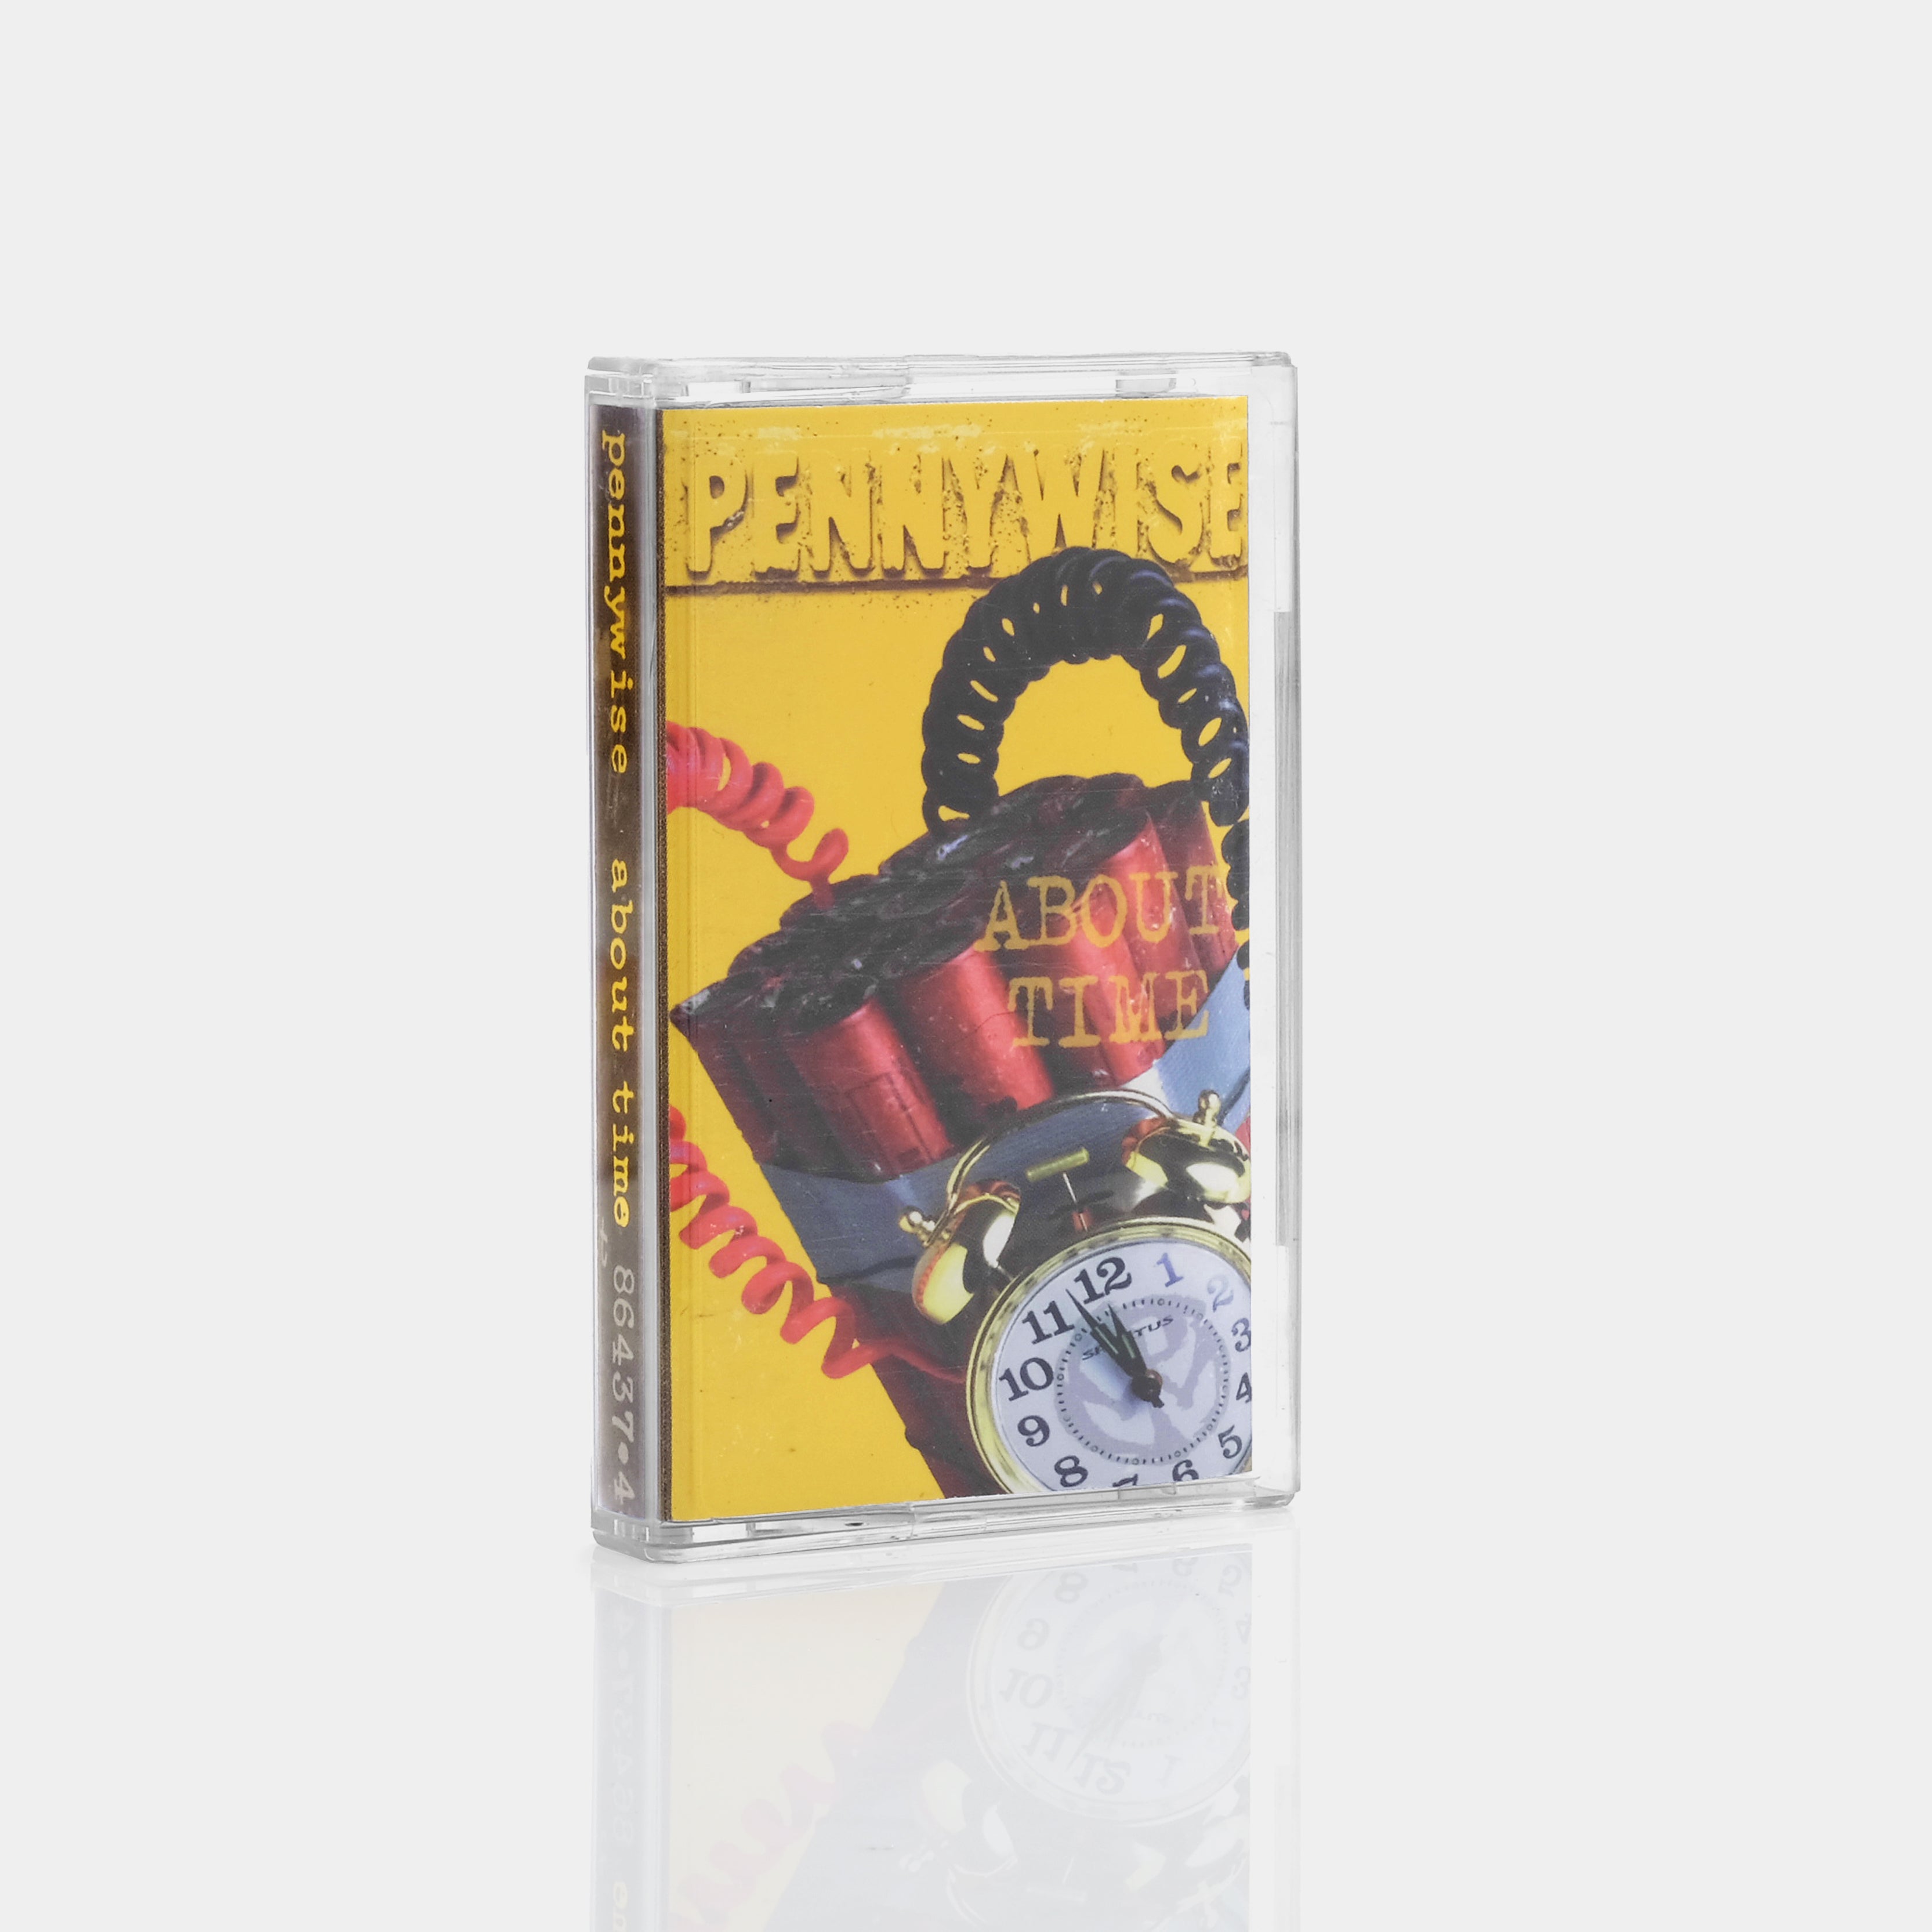 Pennywise - About Time Cassette Tape